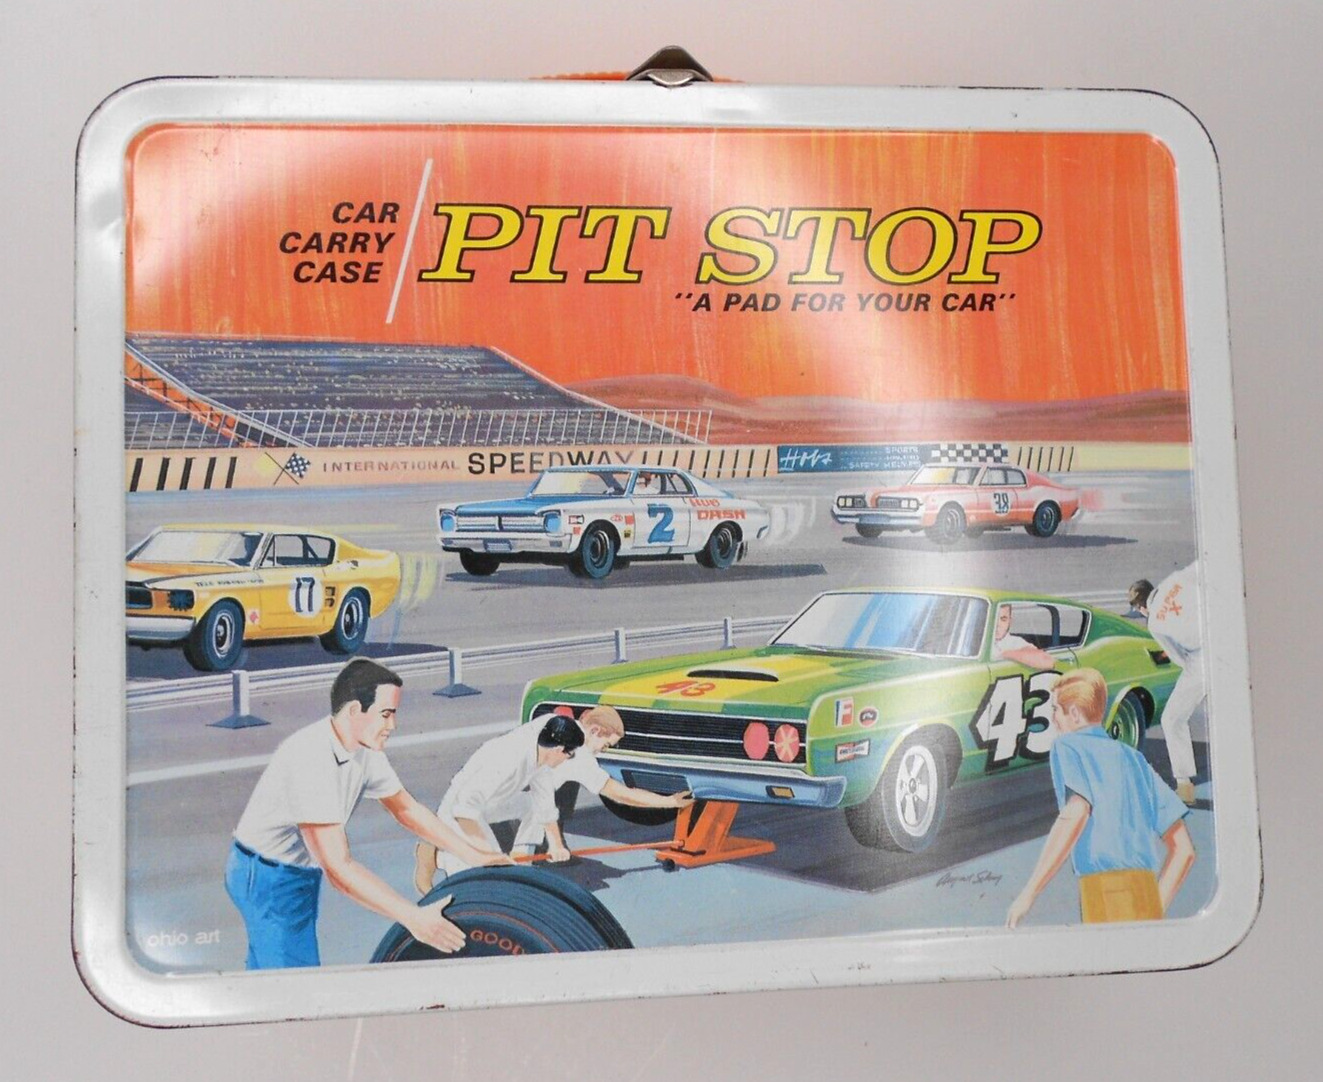 1968 Ohio Art PIT STOP Lunch Box Car Carry Case with Insert R3